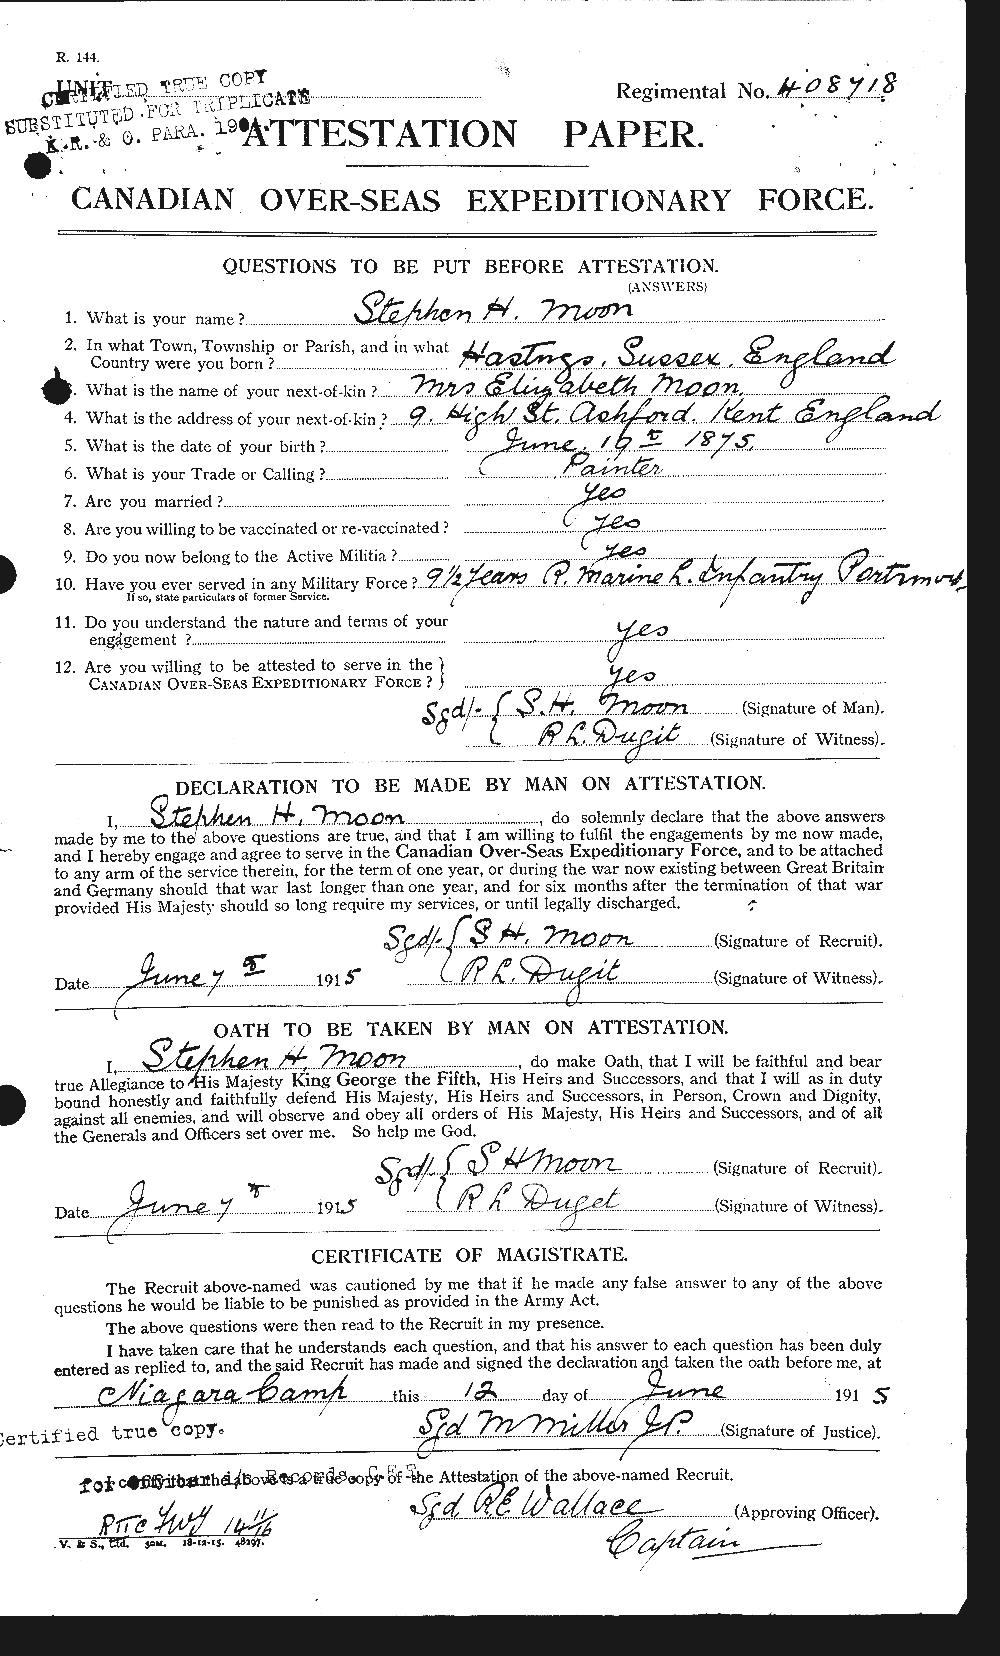 Personnel Records of the First World War - CEF 503030a